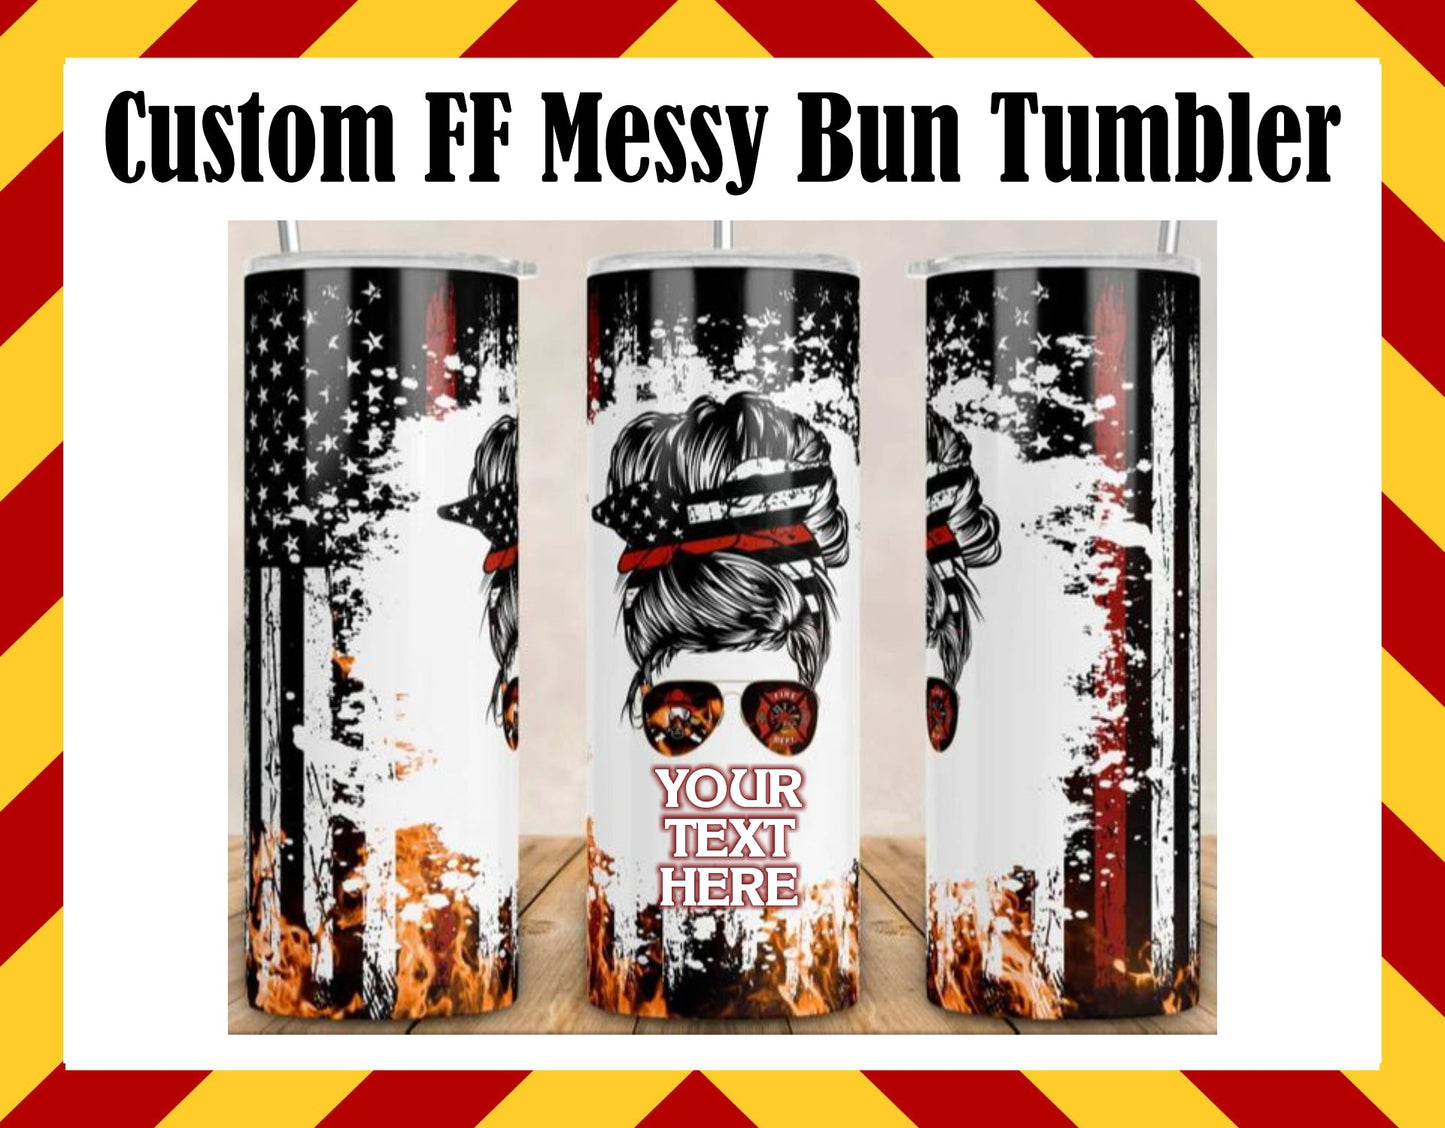 Stainless Steel Cup -  Messy Bun Custom Firefighter Design Hot/Cold Cup